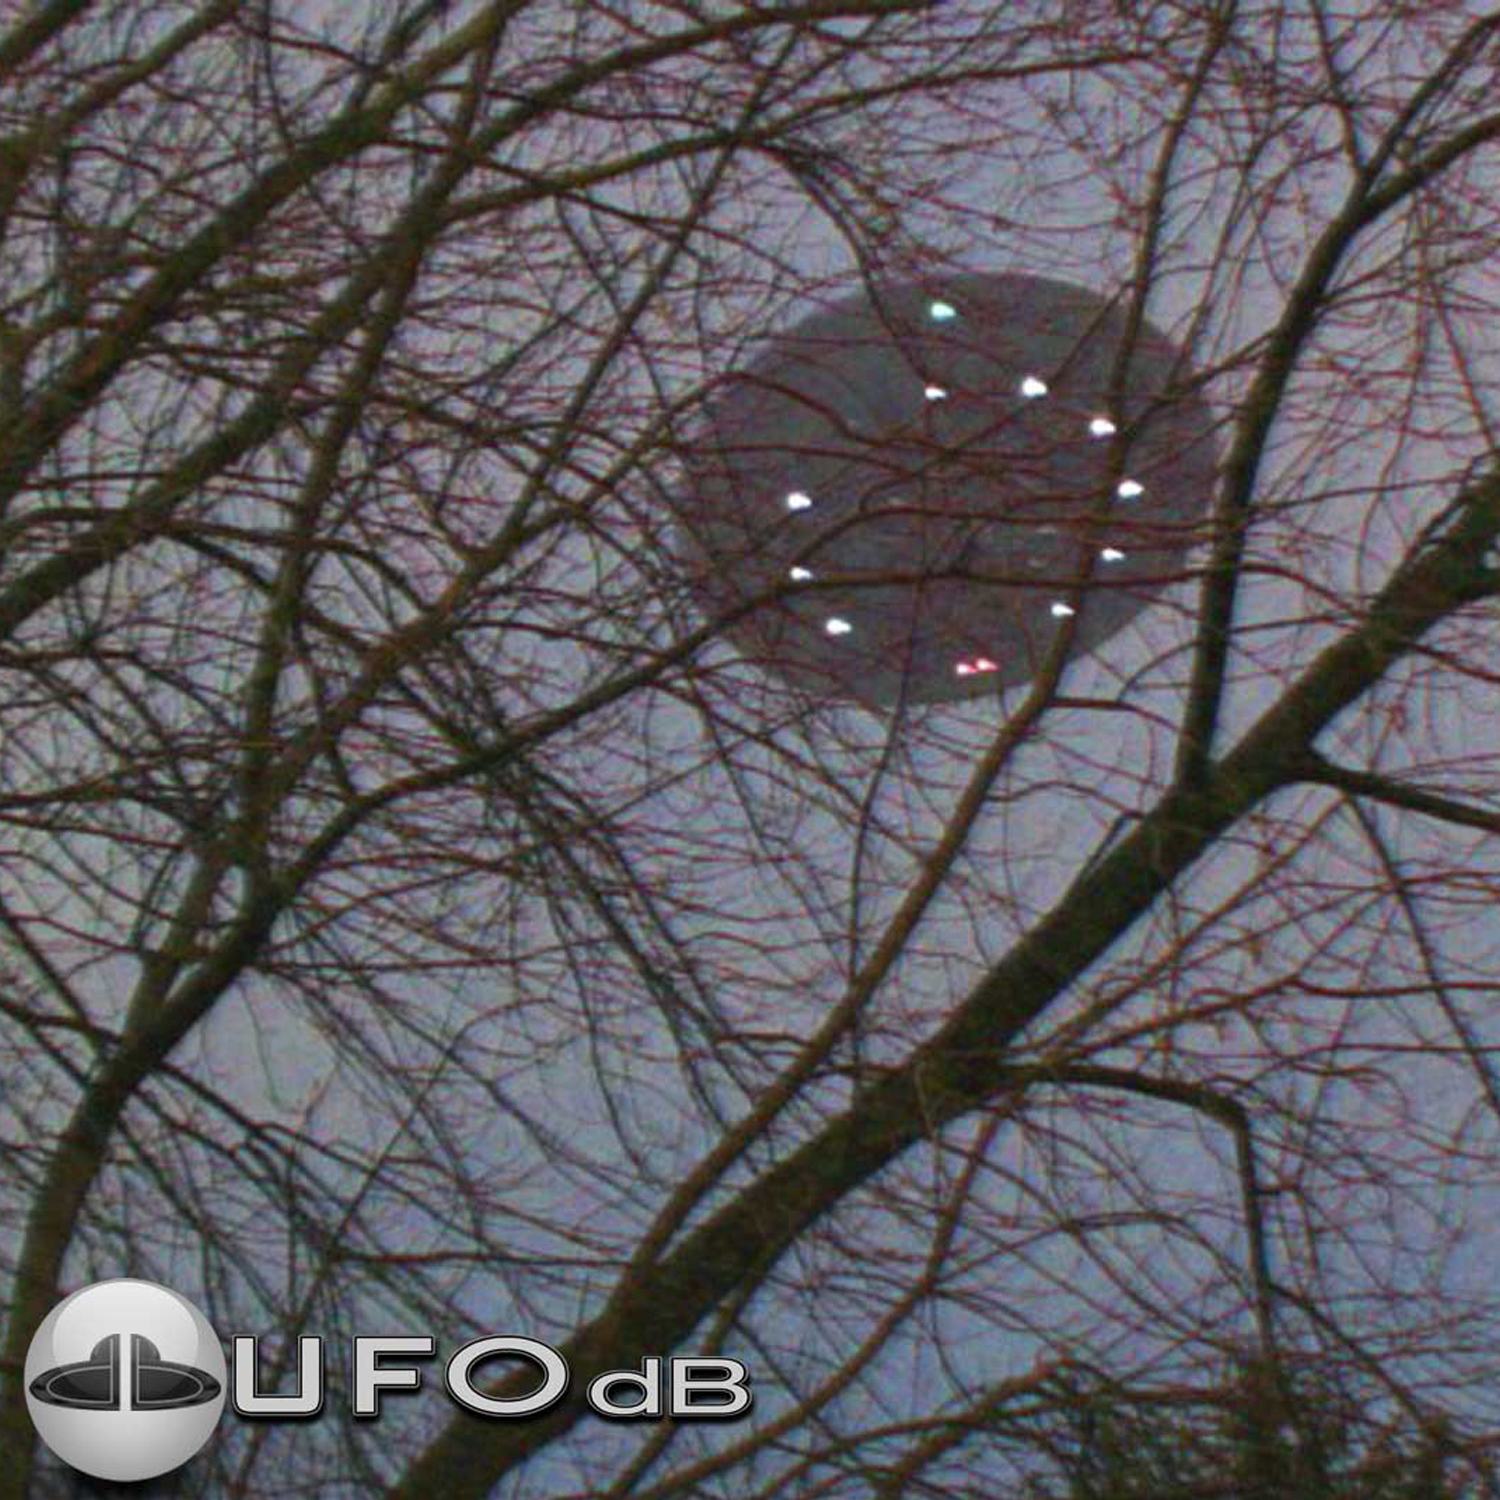 Incredible UFO Picture  we can see under, all the lights of the UFO UFO Picture #37-2